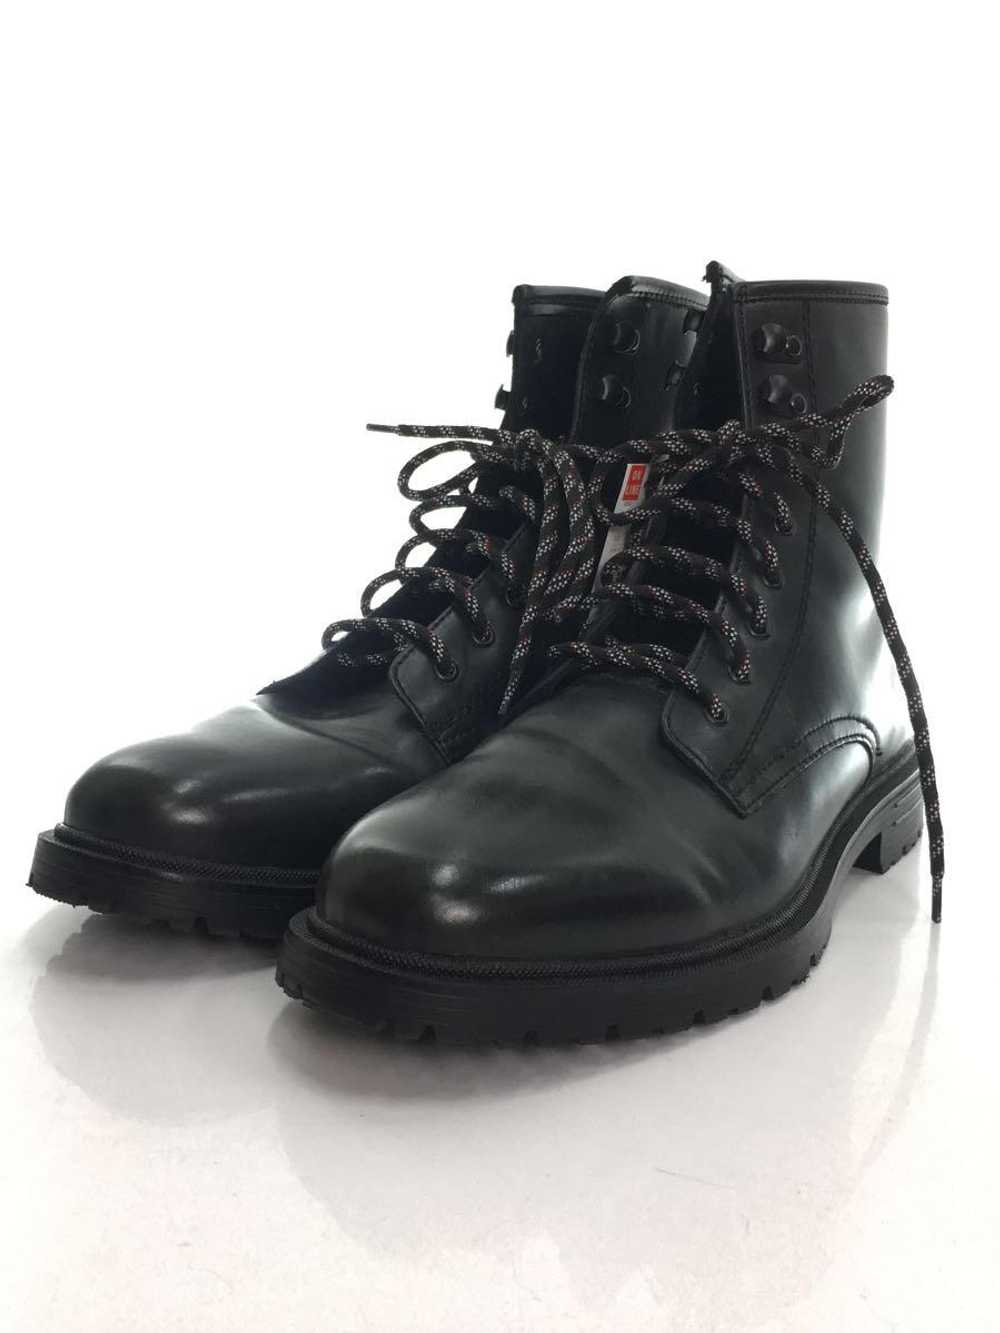 Zara Lace Up Boots/44/Blk Shoes BYU40 - image 2